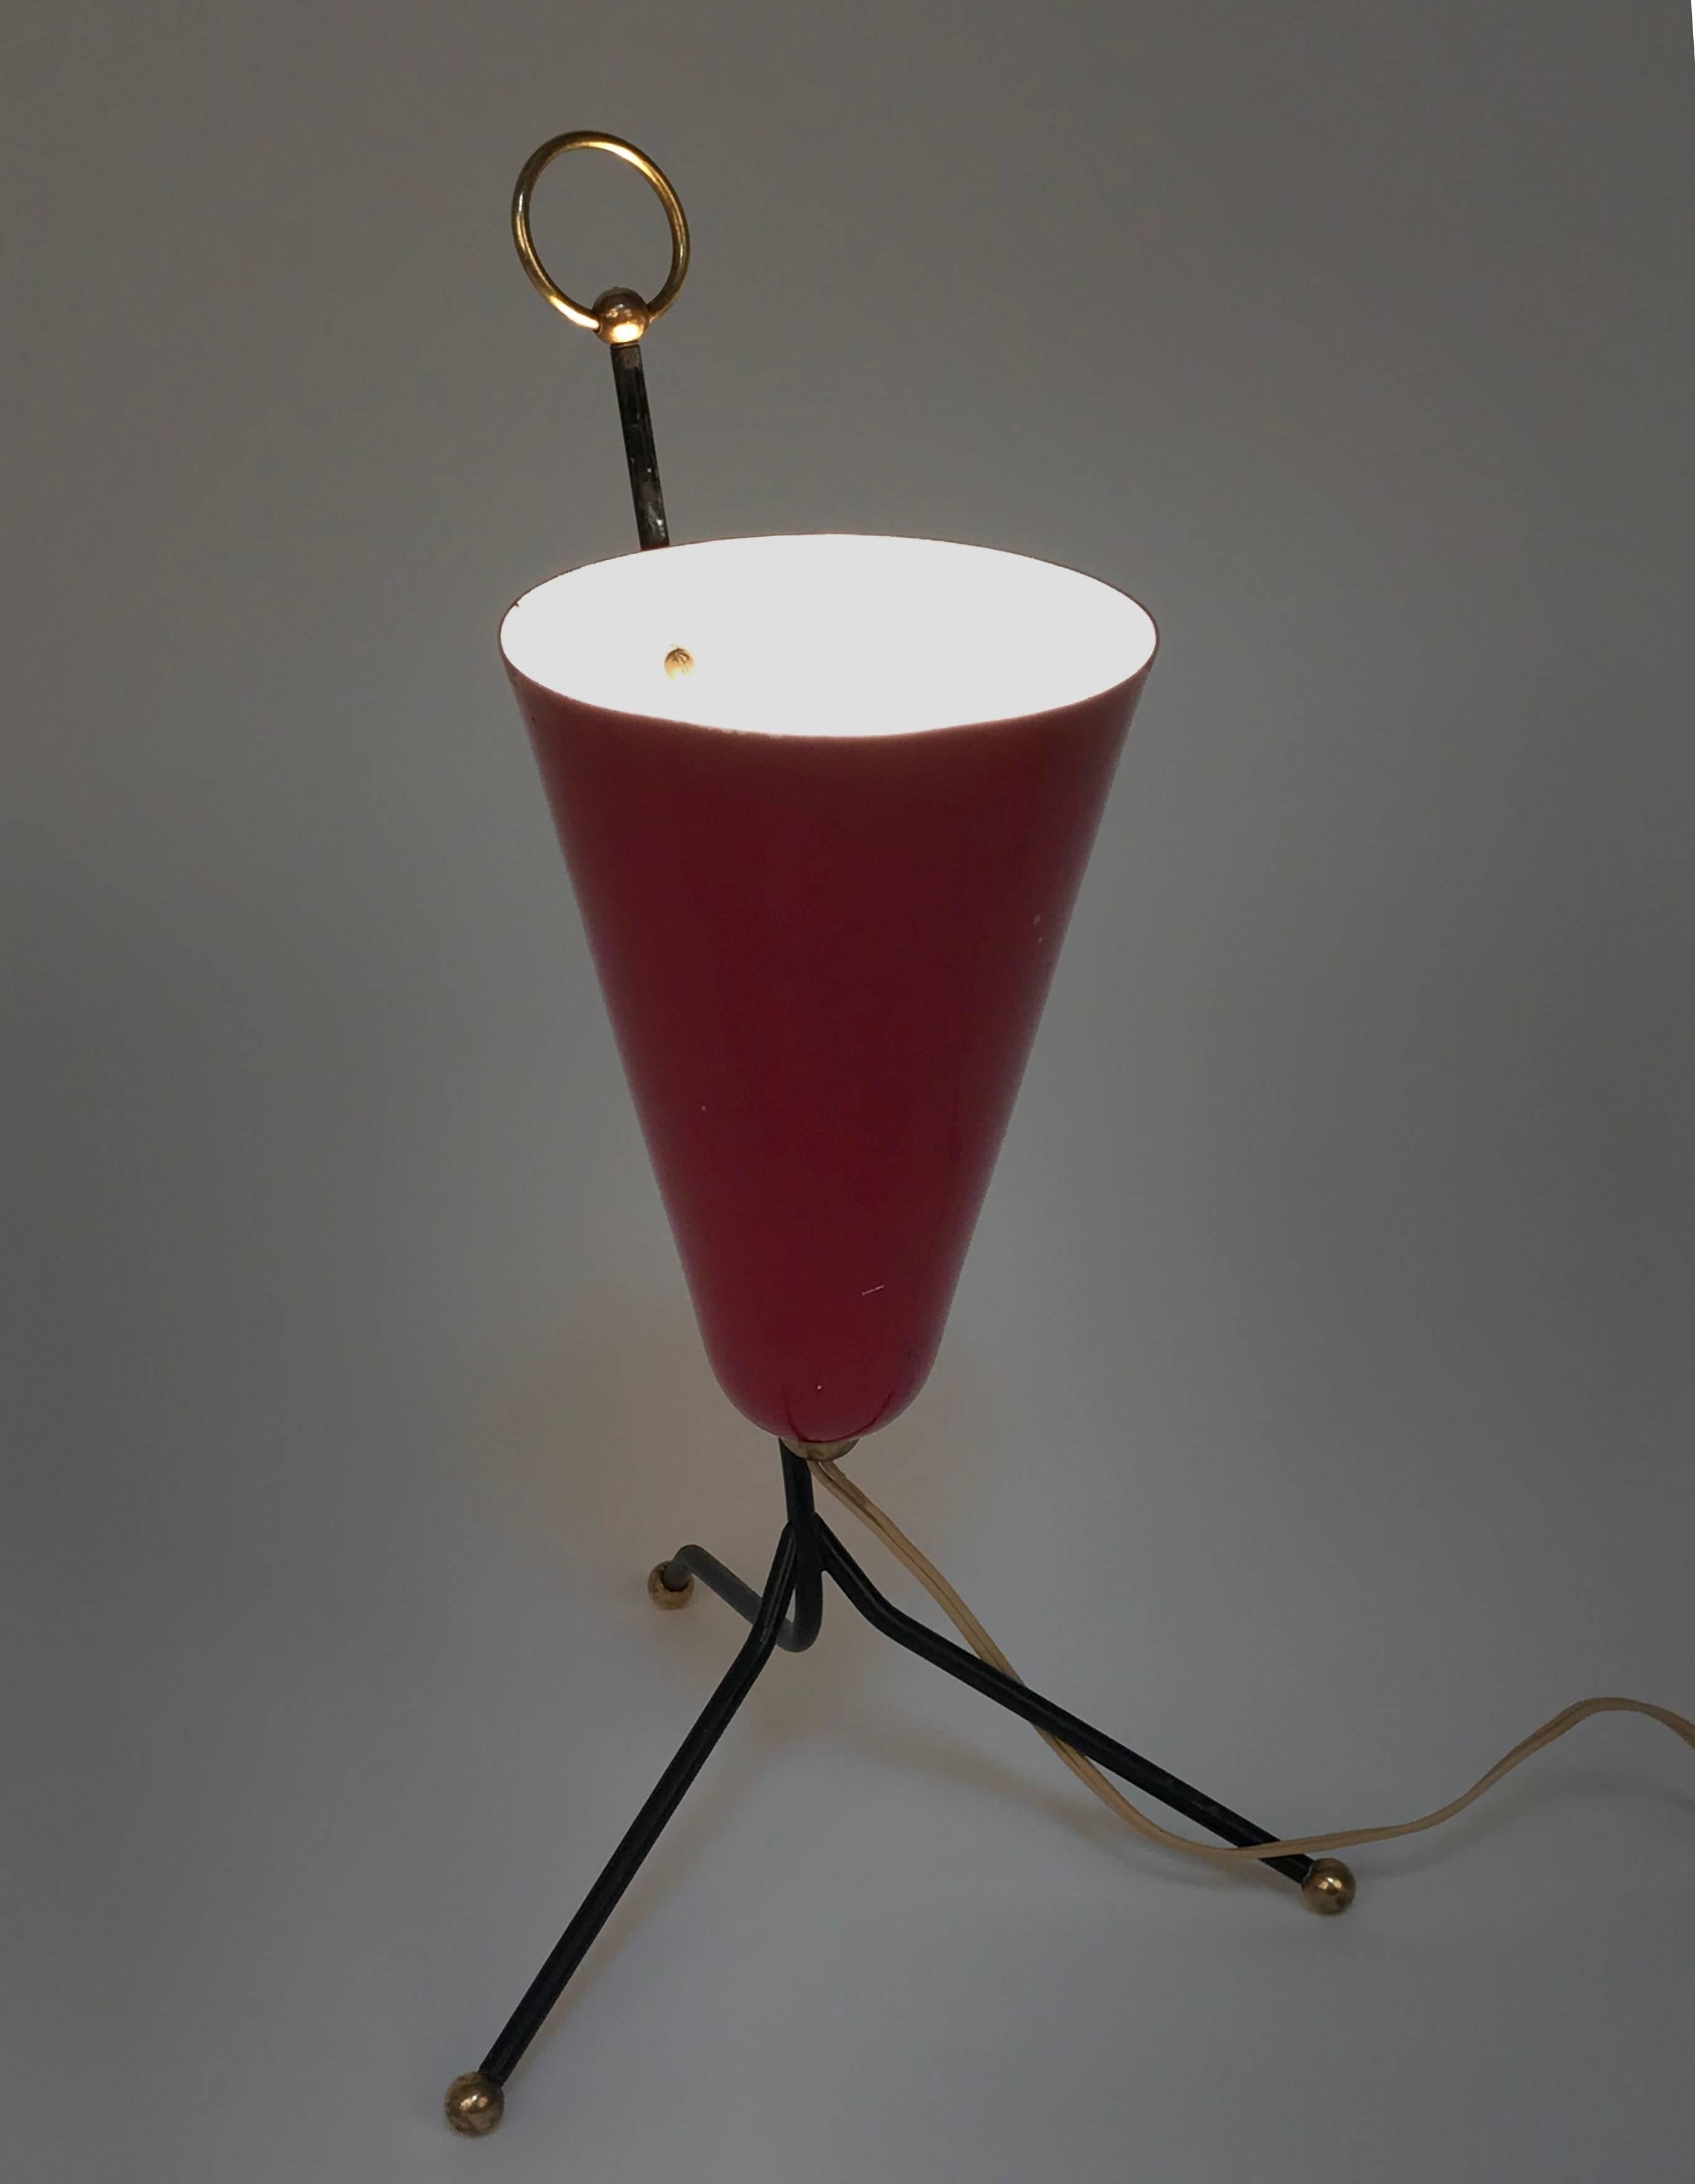 Red Lacquered Metal and Brass Conical Italian Table Lamp with Tripod, 1950s For Sale 2